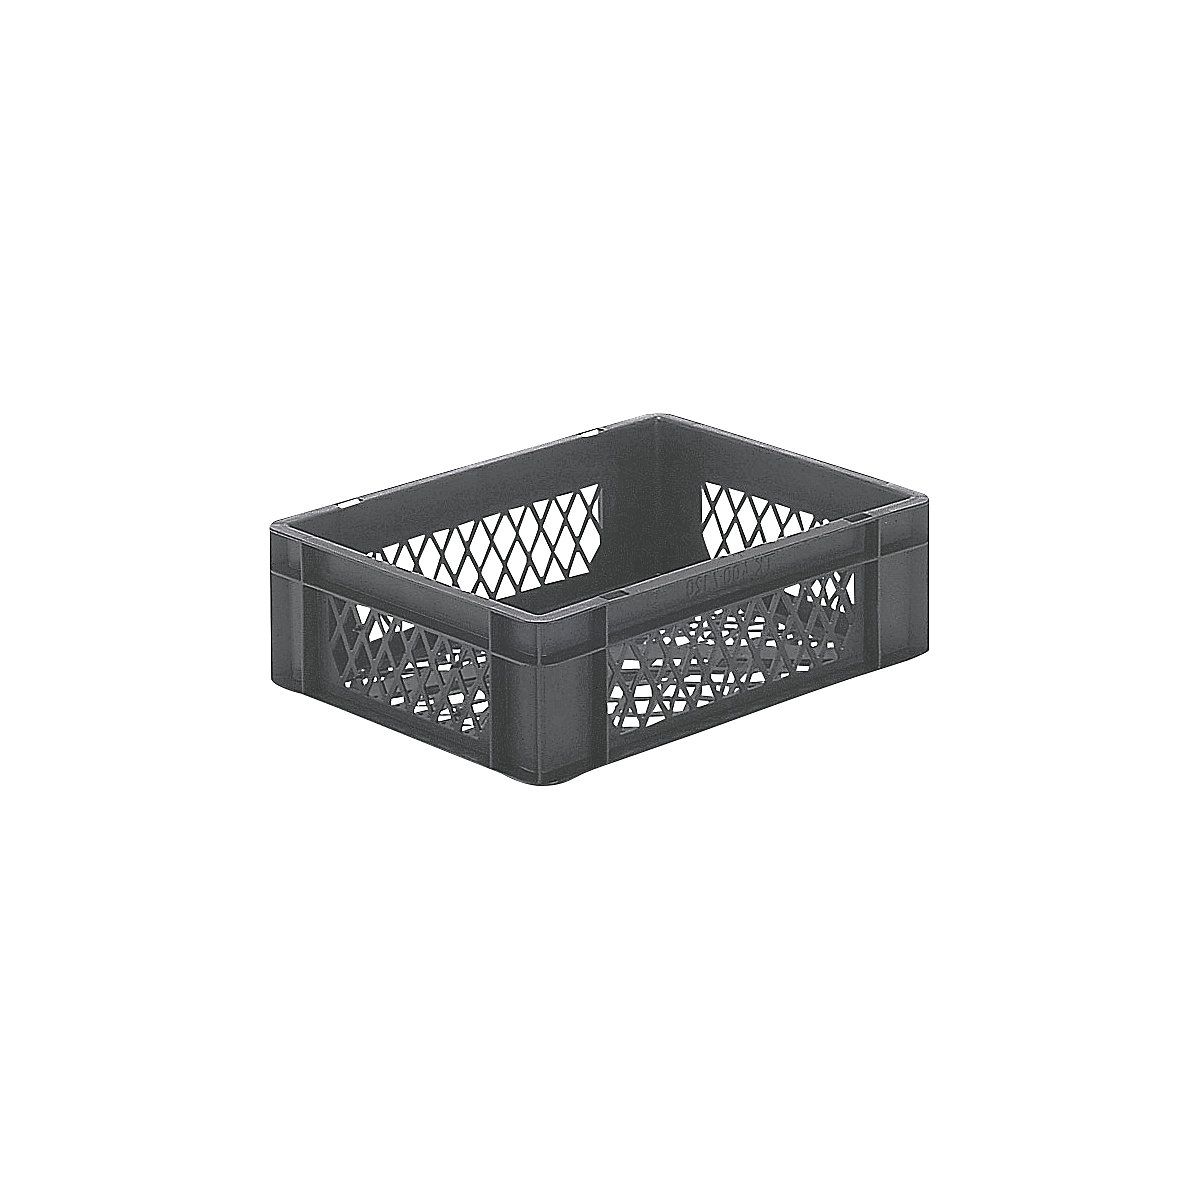 Euro stacking container, perforated walls and base, LxWxH 400 x 300 x 120 mm, grey, pack of 5-8